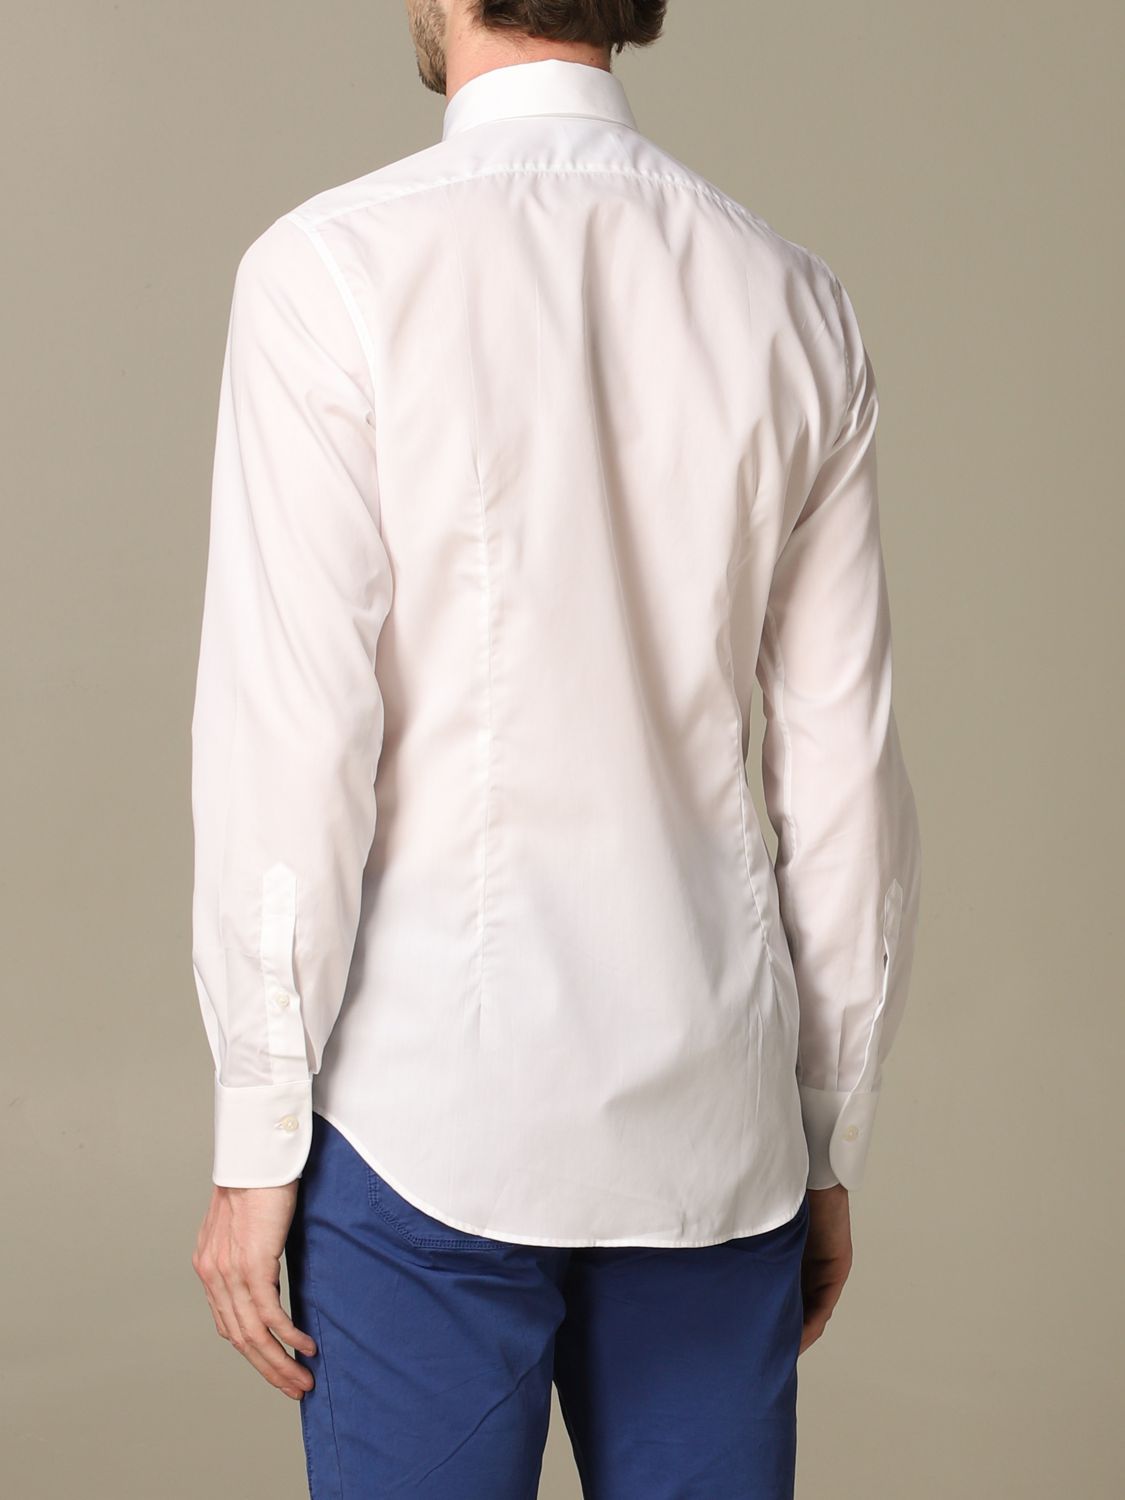 Xc Outlet: cotton shirt with embroidered logo - White | Xc shirt DV2 XD